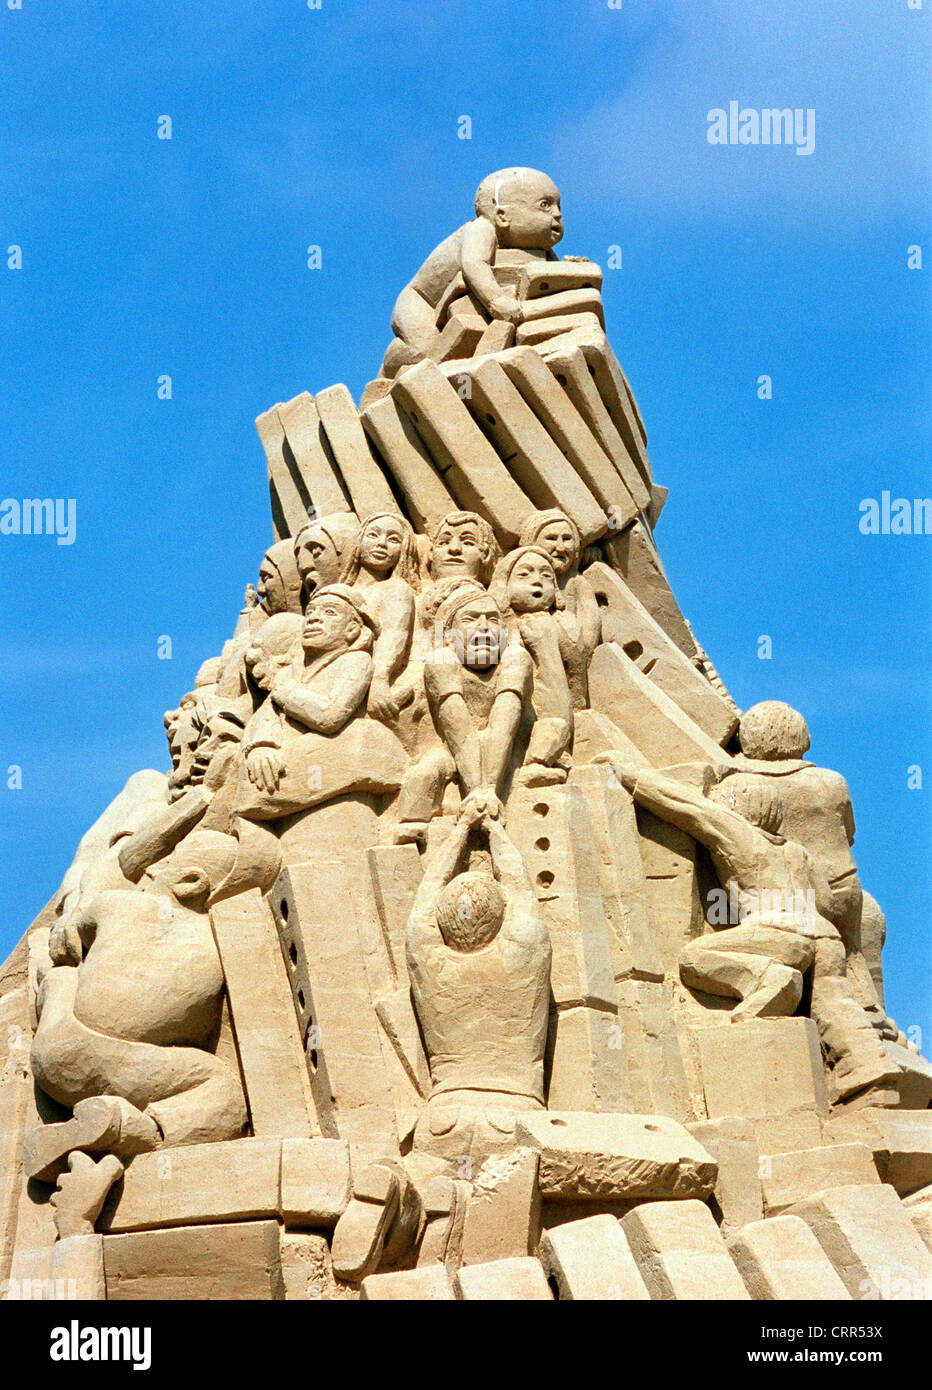 The sand sculpture faces a big city in Berlin Stock Photo